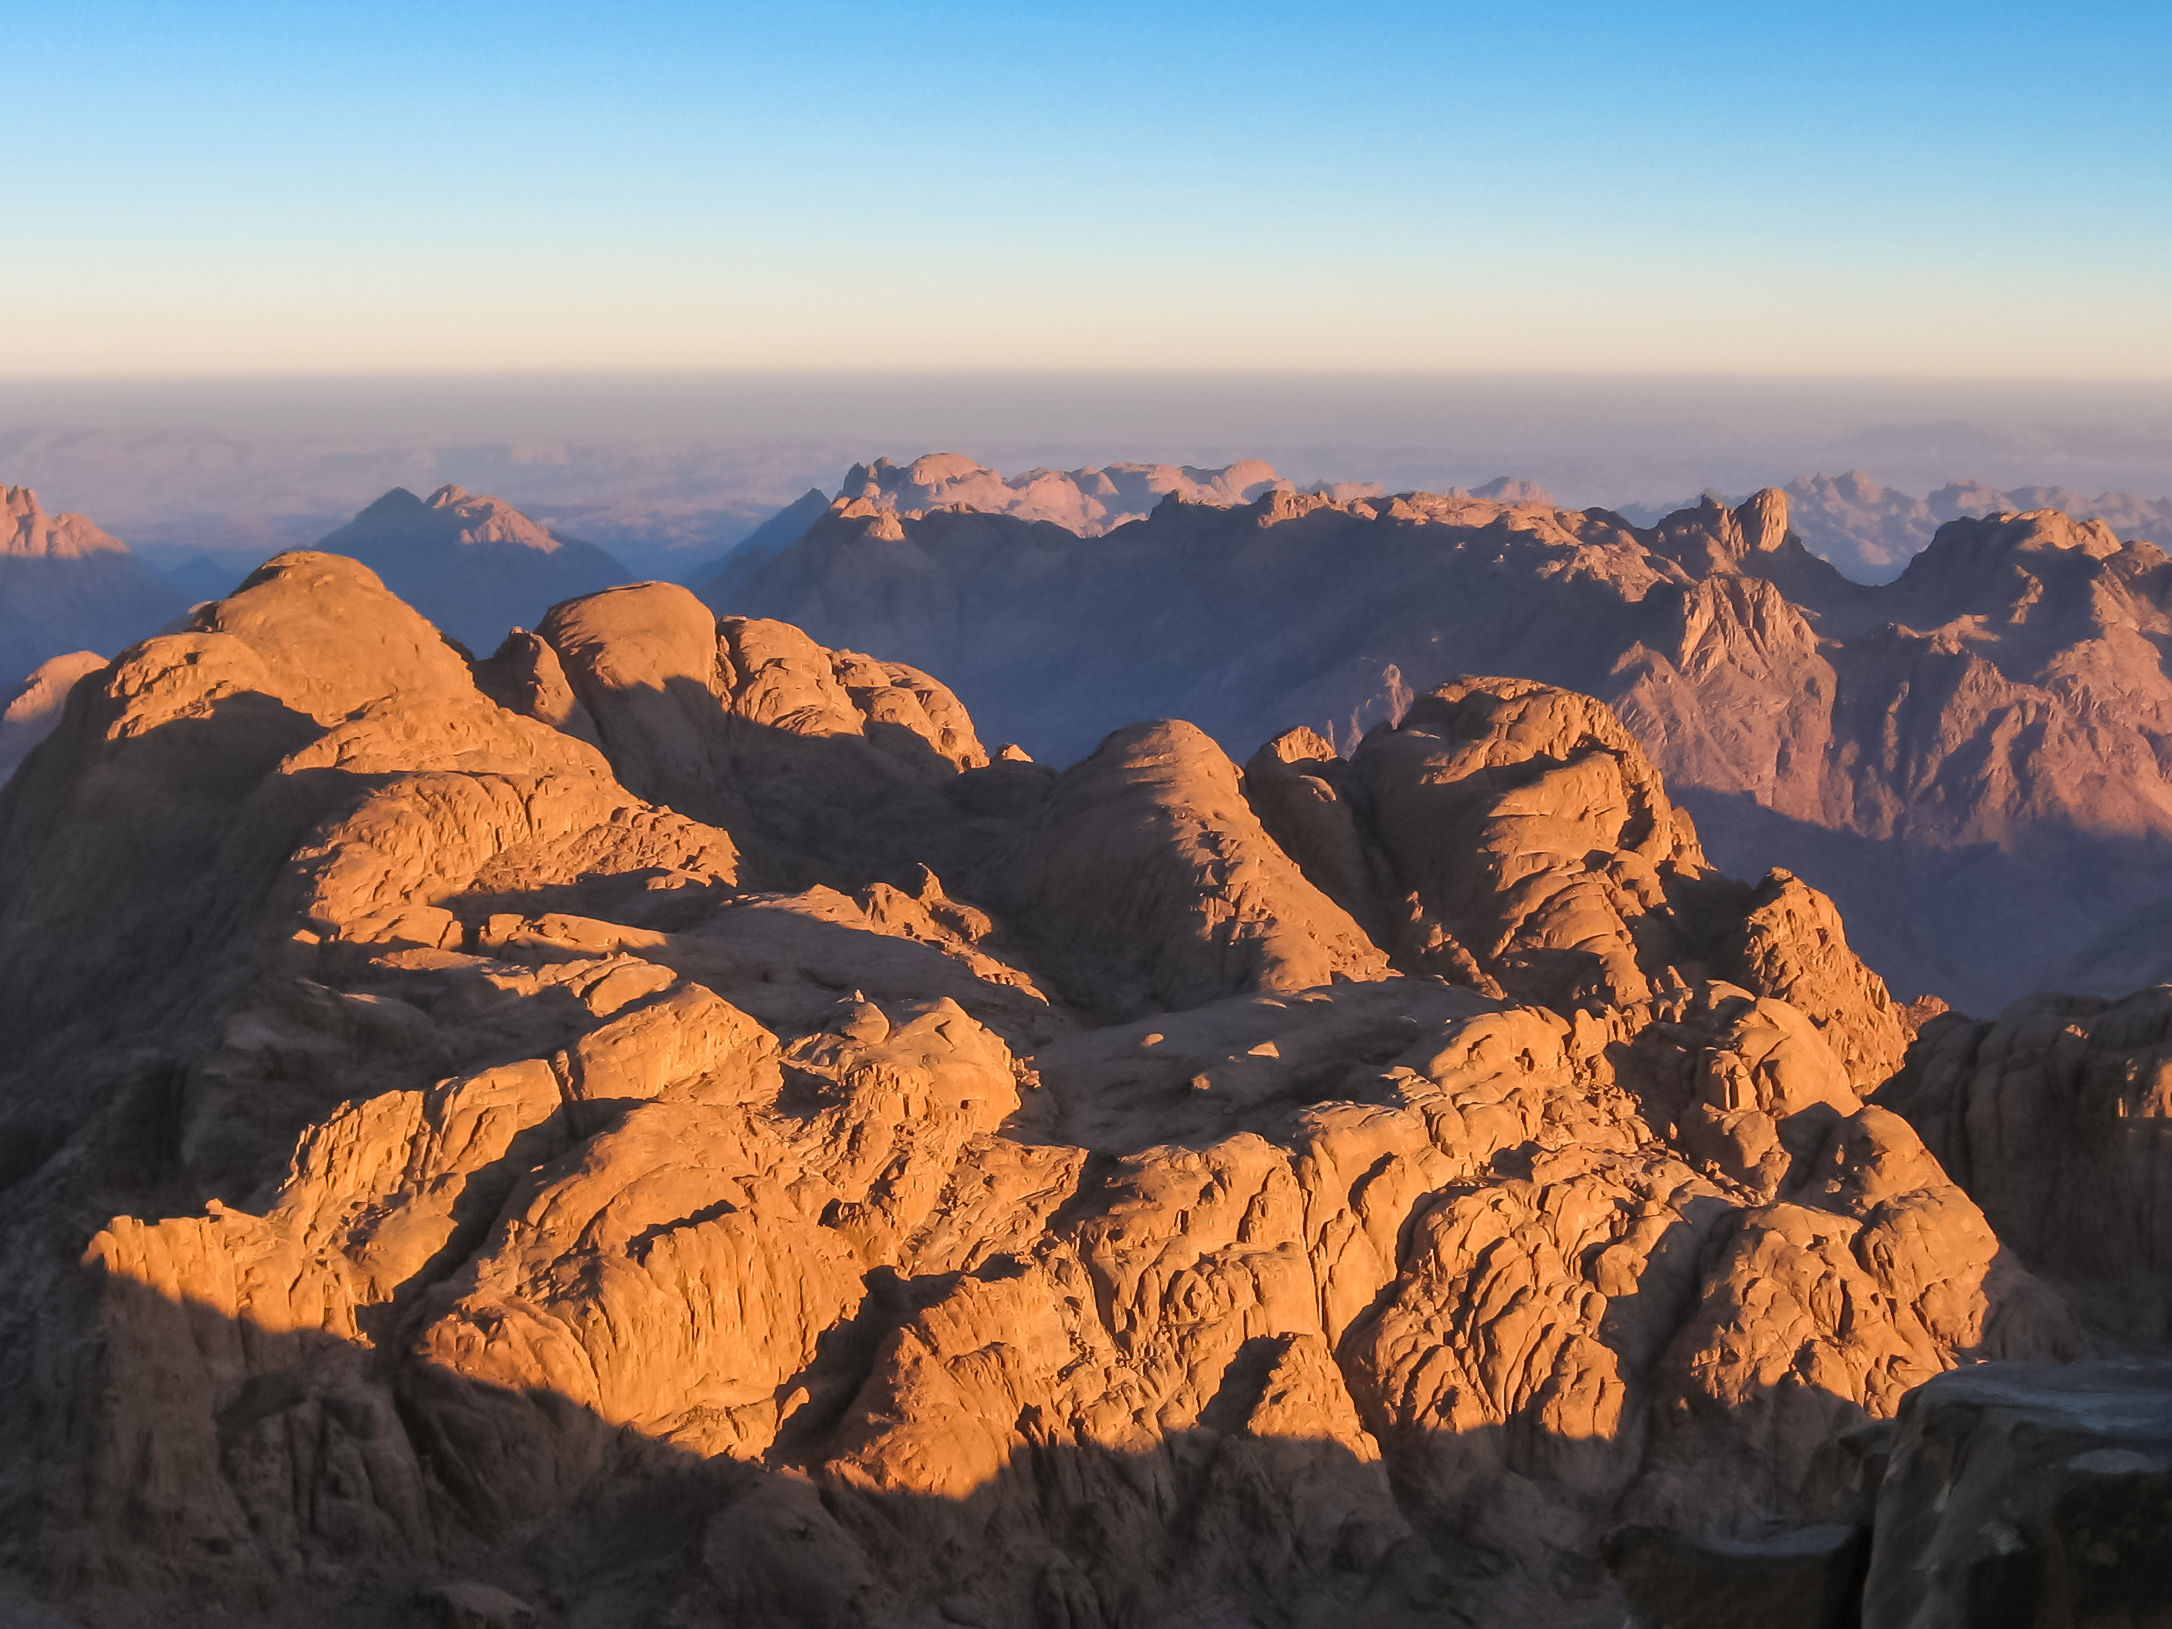 Slide 16 of 41: Spectacular aerial view of the holy summit of Mount Sinai, Aka Jebel Musa, 2285 meters, at sunrise, Sinai Peninsula in Egypt.